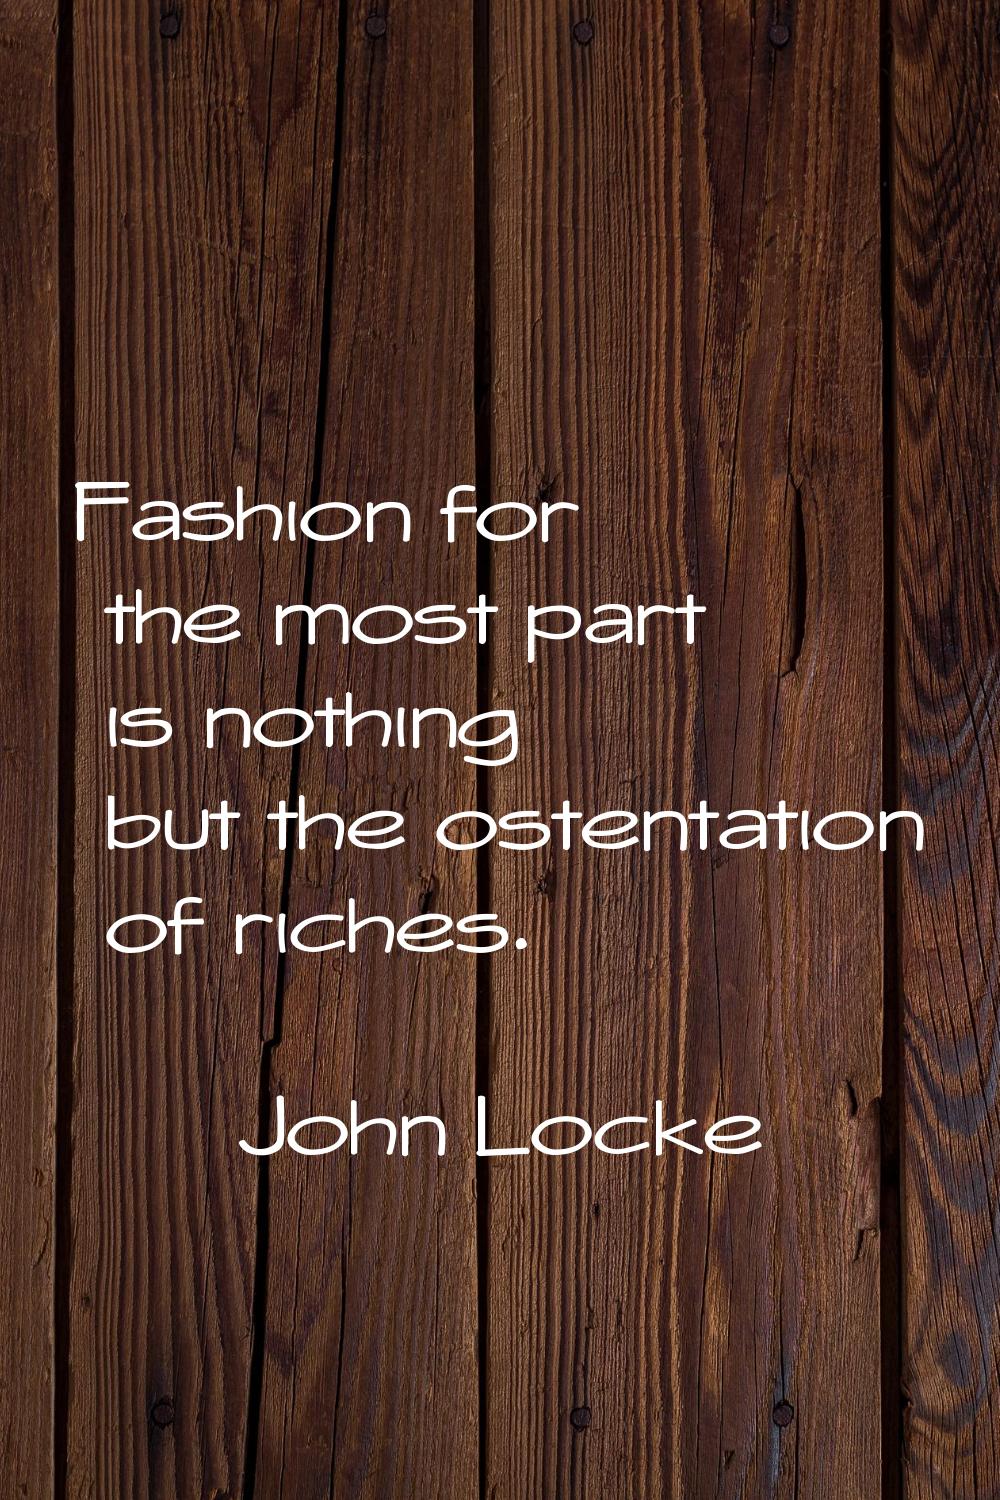 Fashion for the most part is nothing but the ostentation of riches.